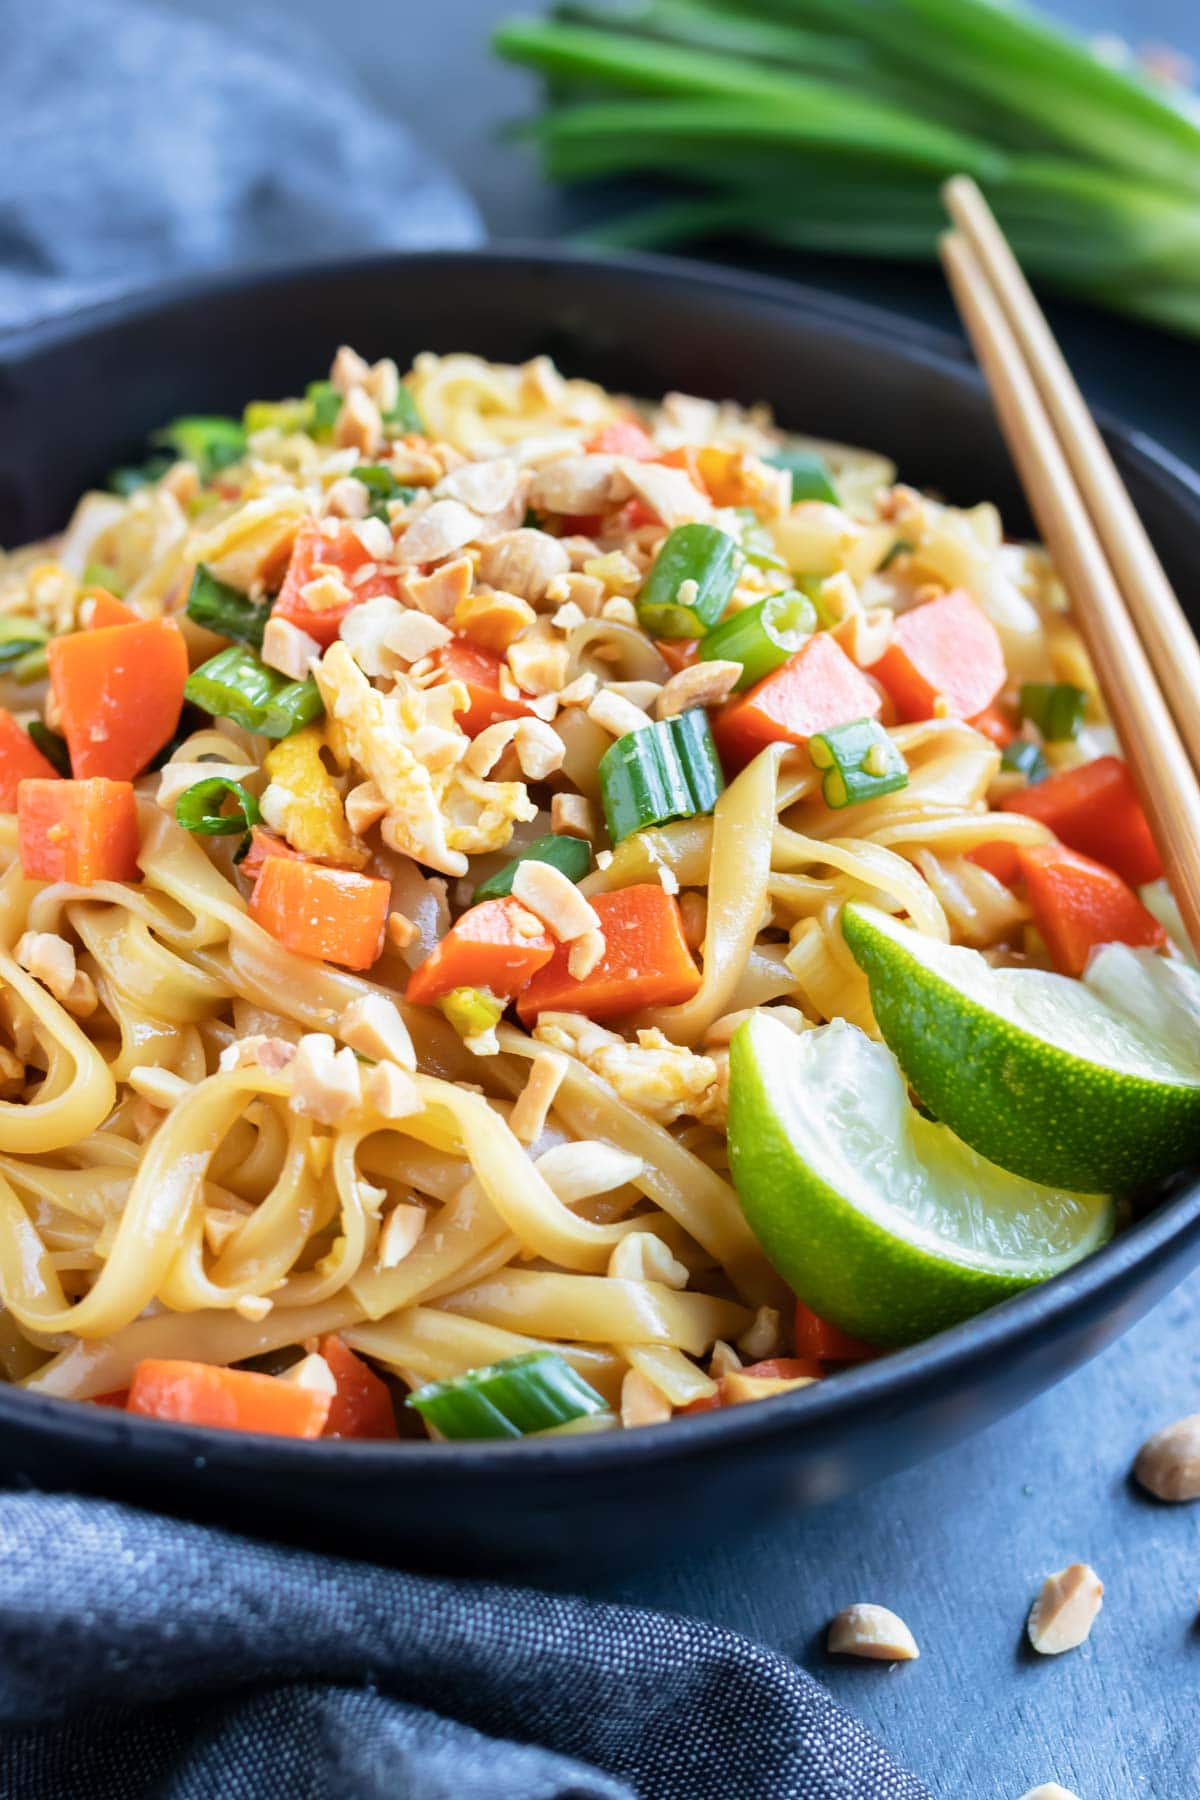 A healthy, gluten-free rice noodle stir-fry dish with chopsticks.